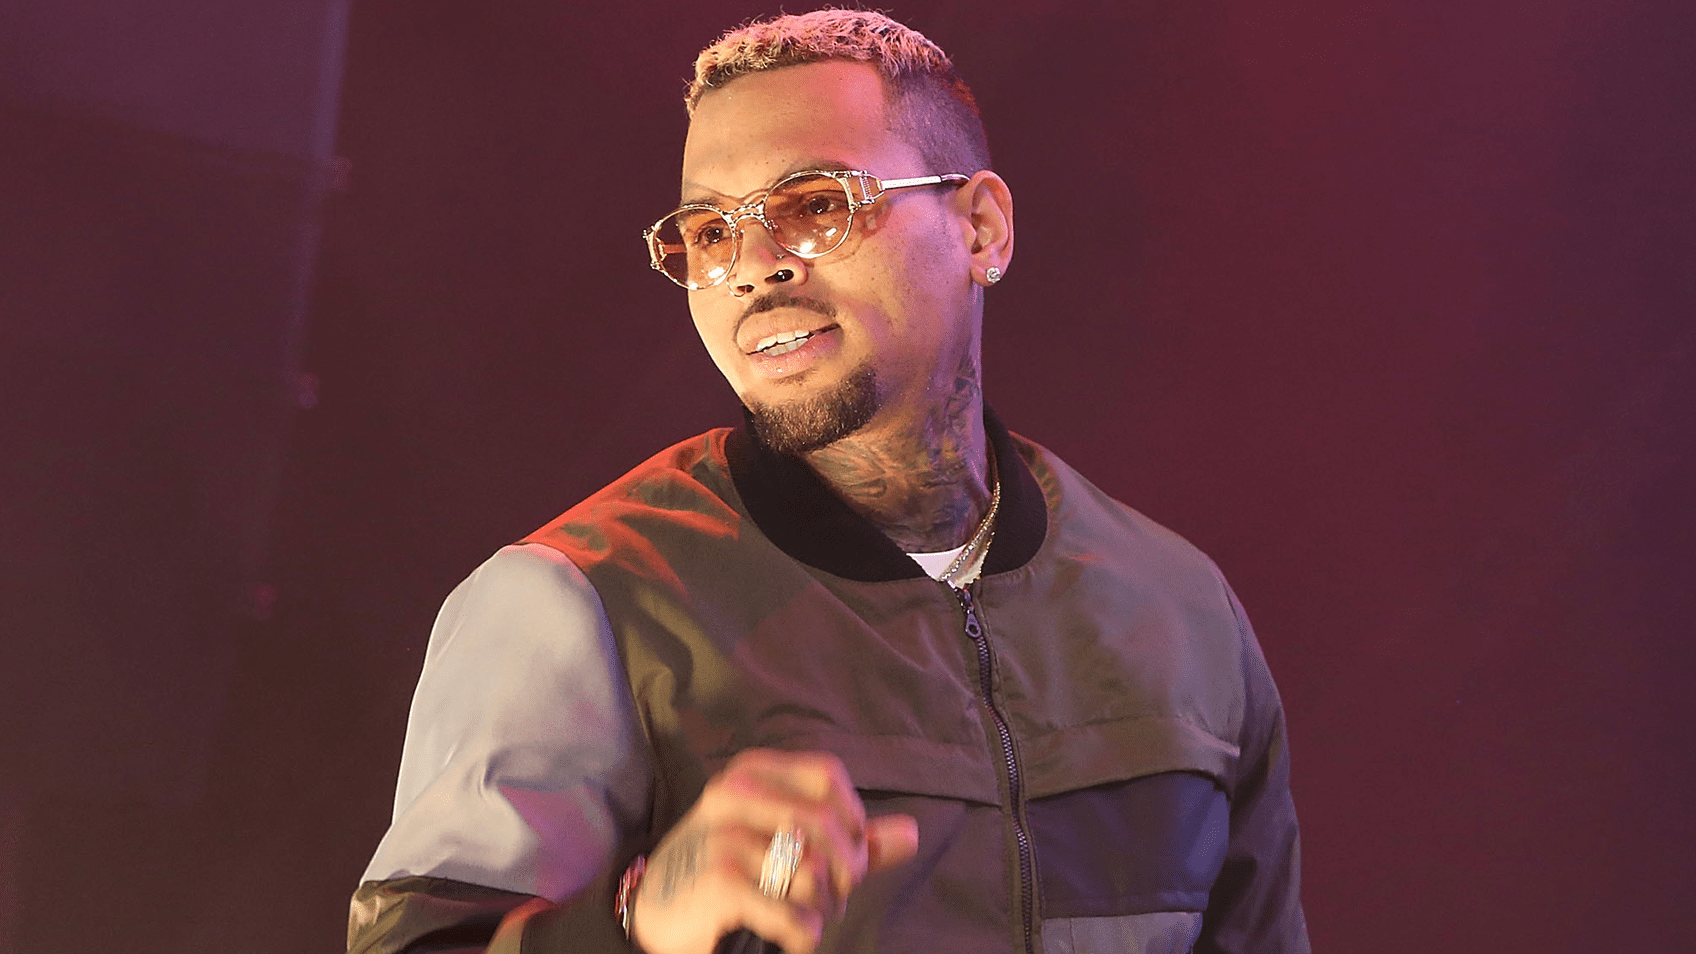 ”chris-brown-responds-after-being-sued-by-a-woman-who-alleges-that-he-raped-her”